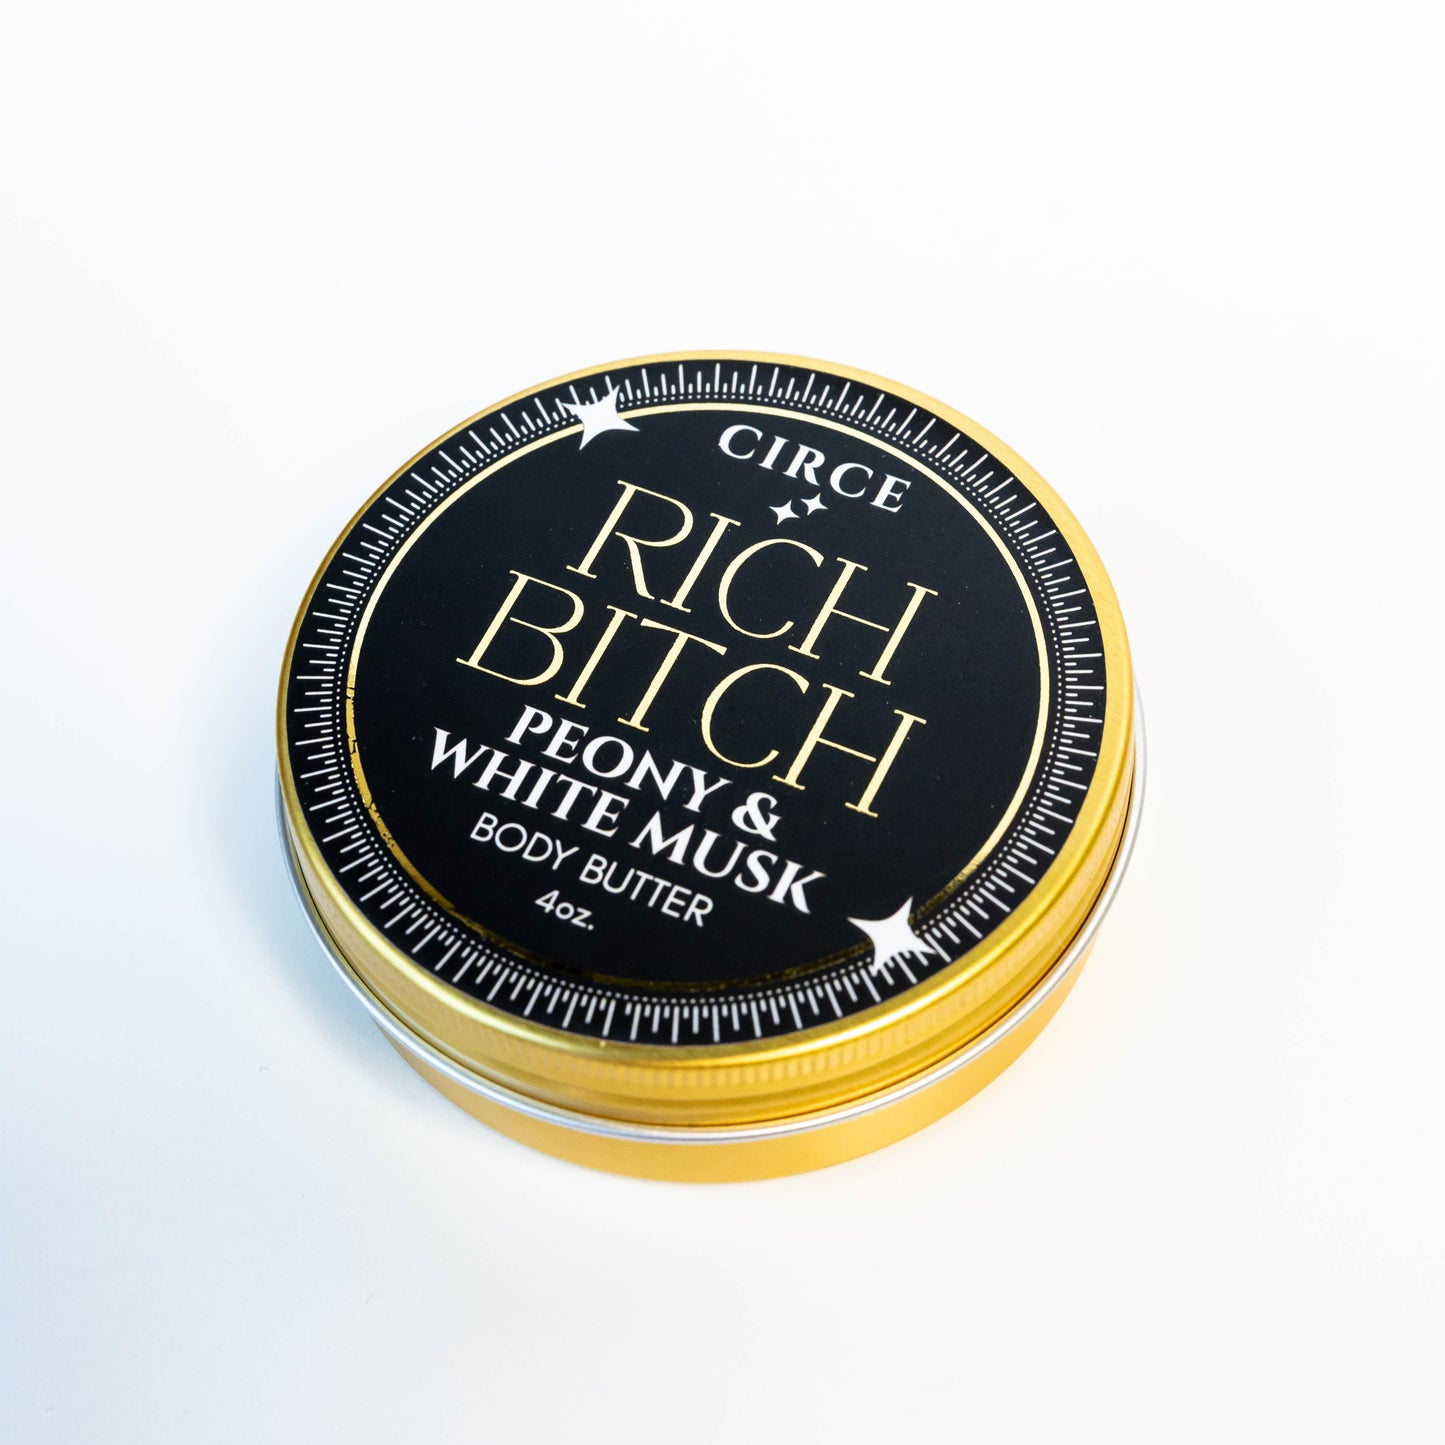 Rich Bitch Body Butter  from Circe Boutique